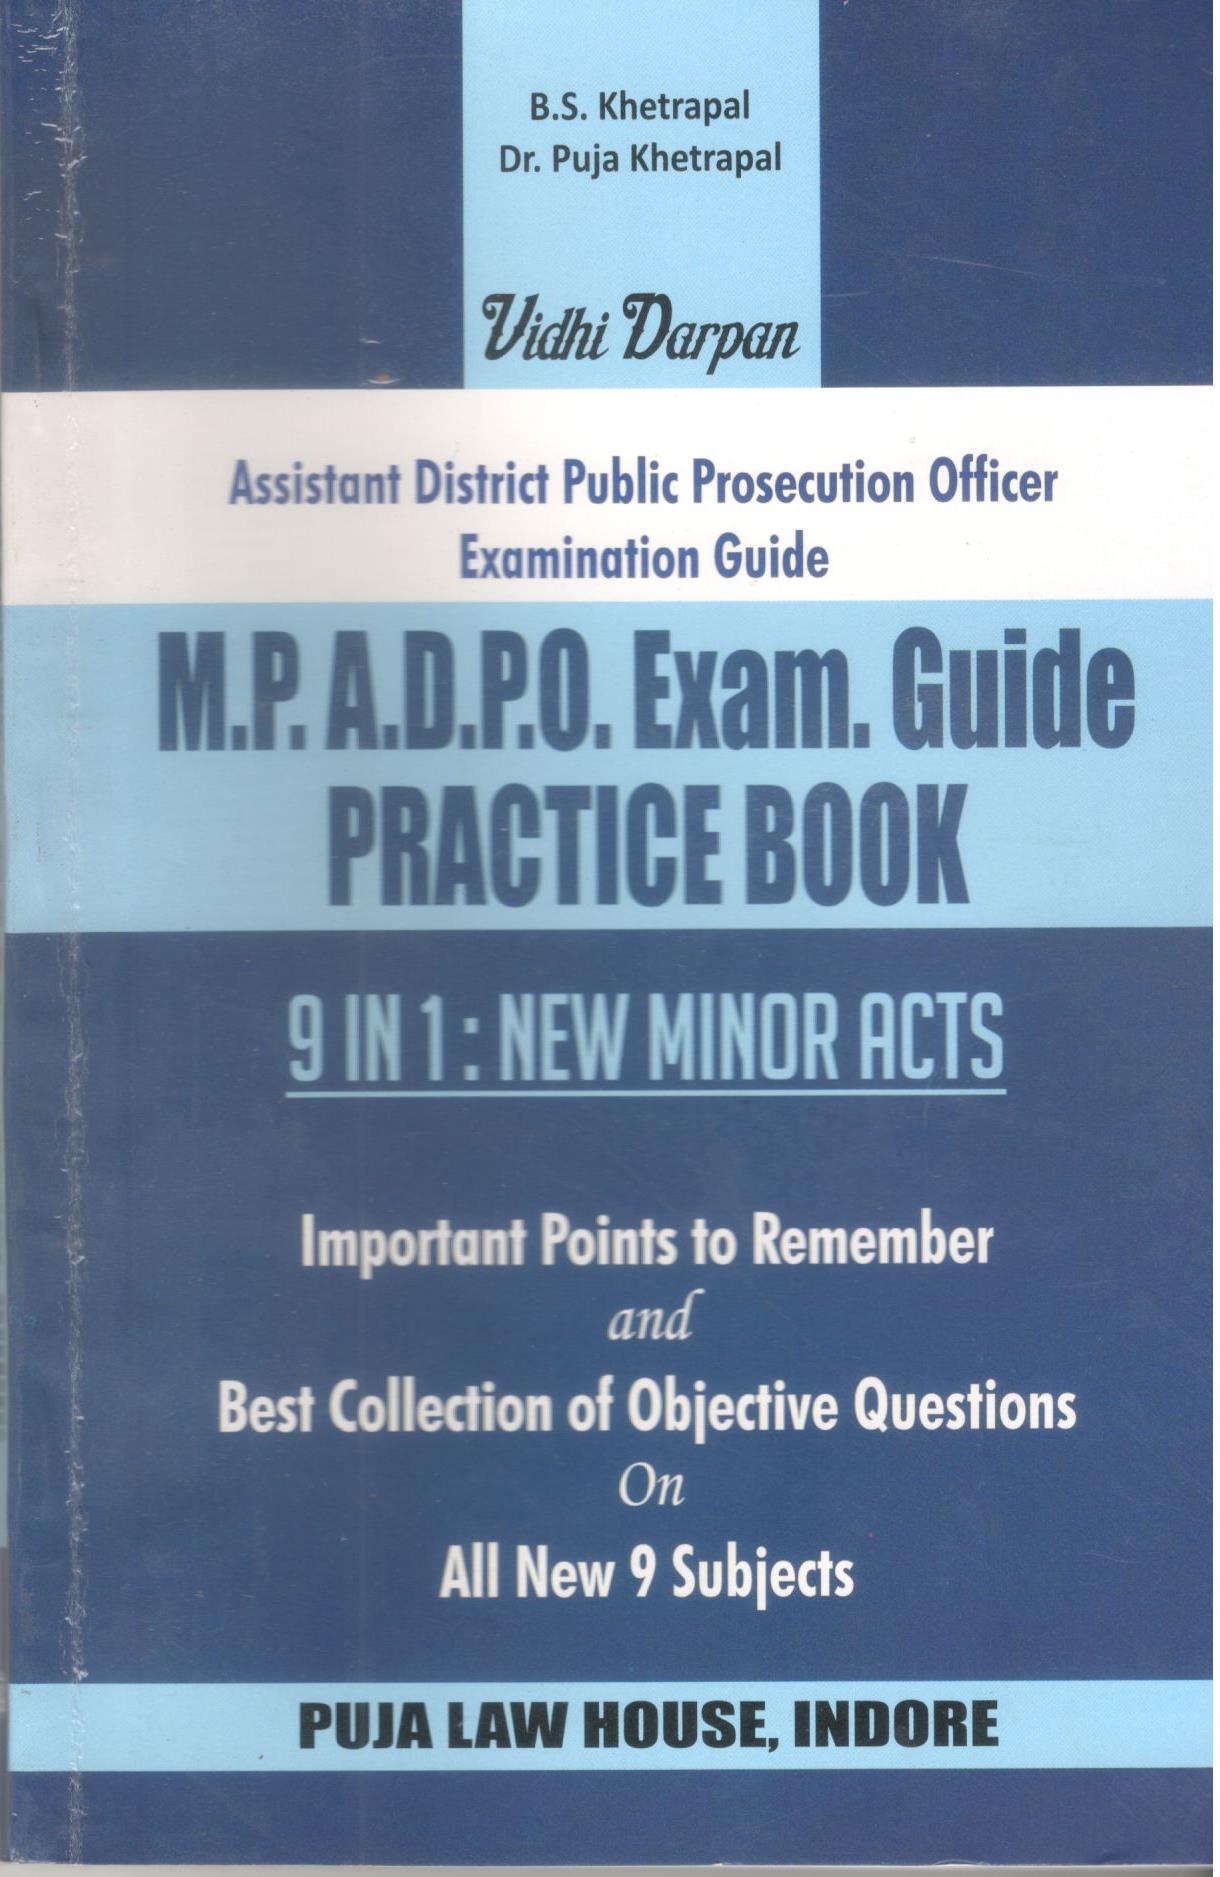 M.P.A.D.P.O. Exam. Guide Practice Book [9 in 1 : Minor acts]